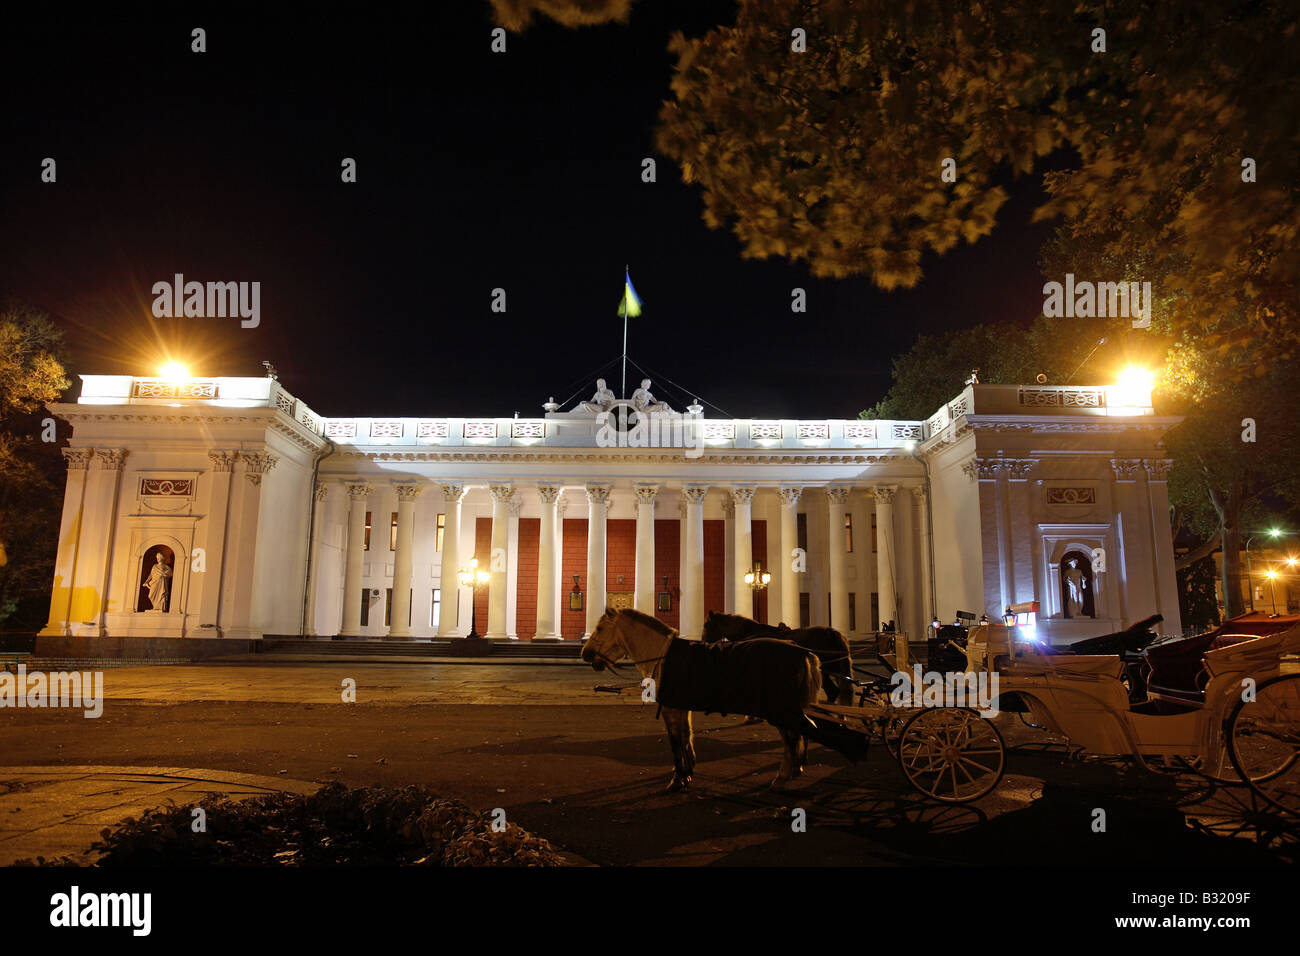 A horse carriage in front of the city hall in Odessa, Ukraine Stock Photo